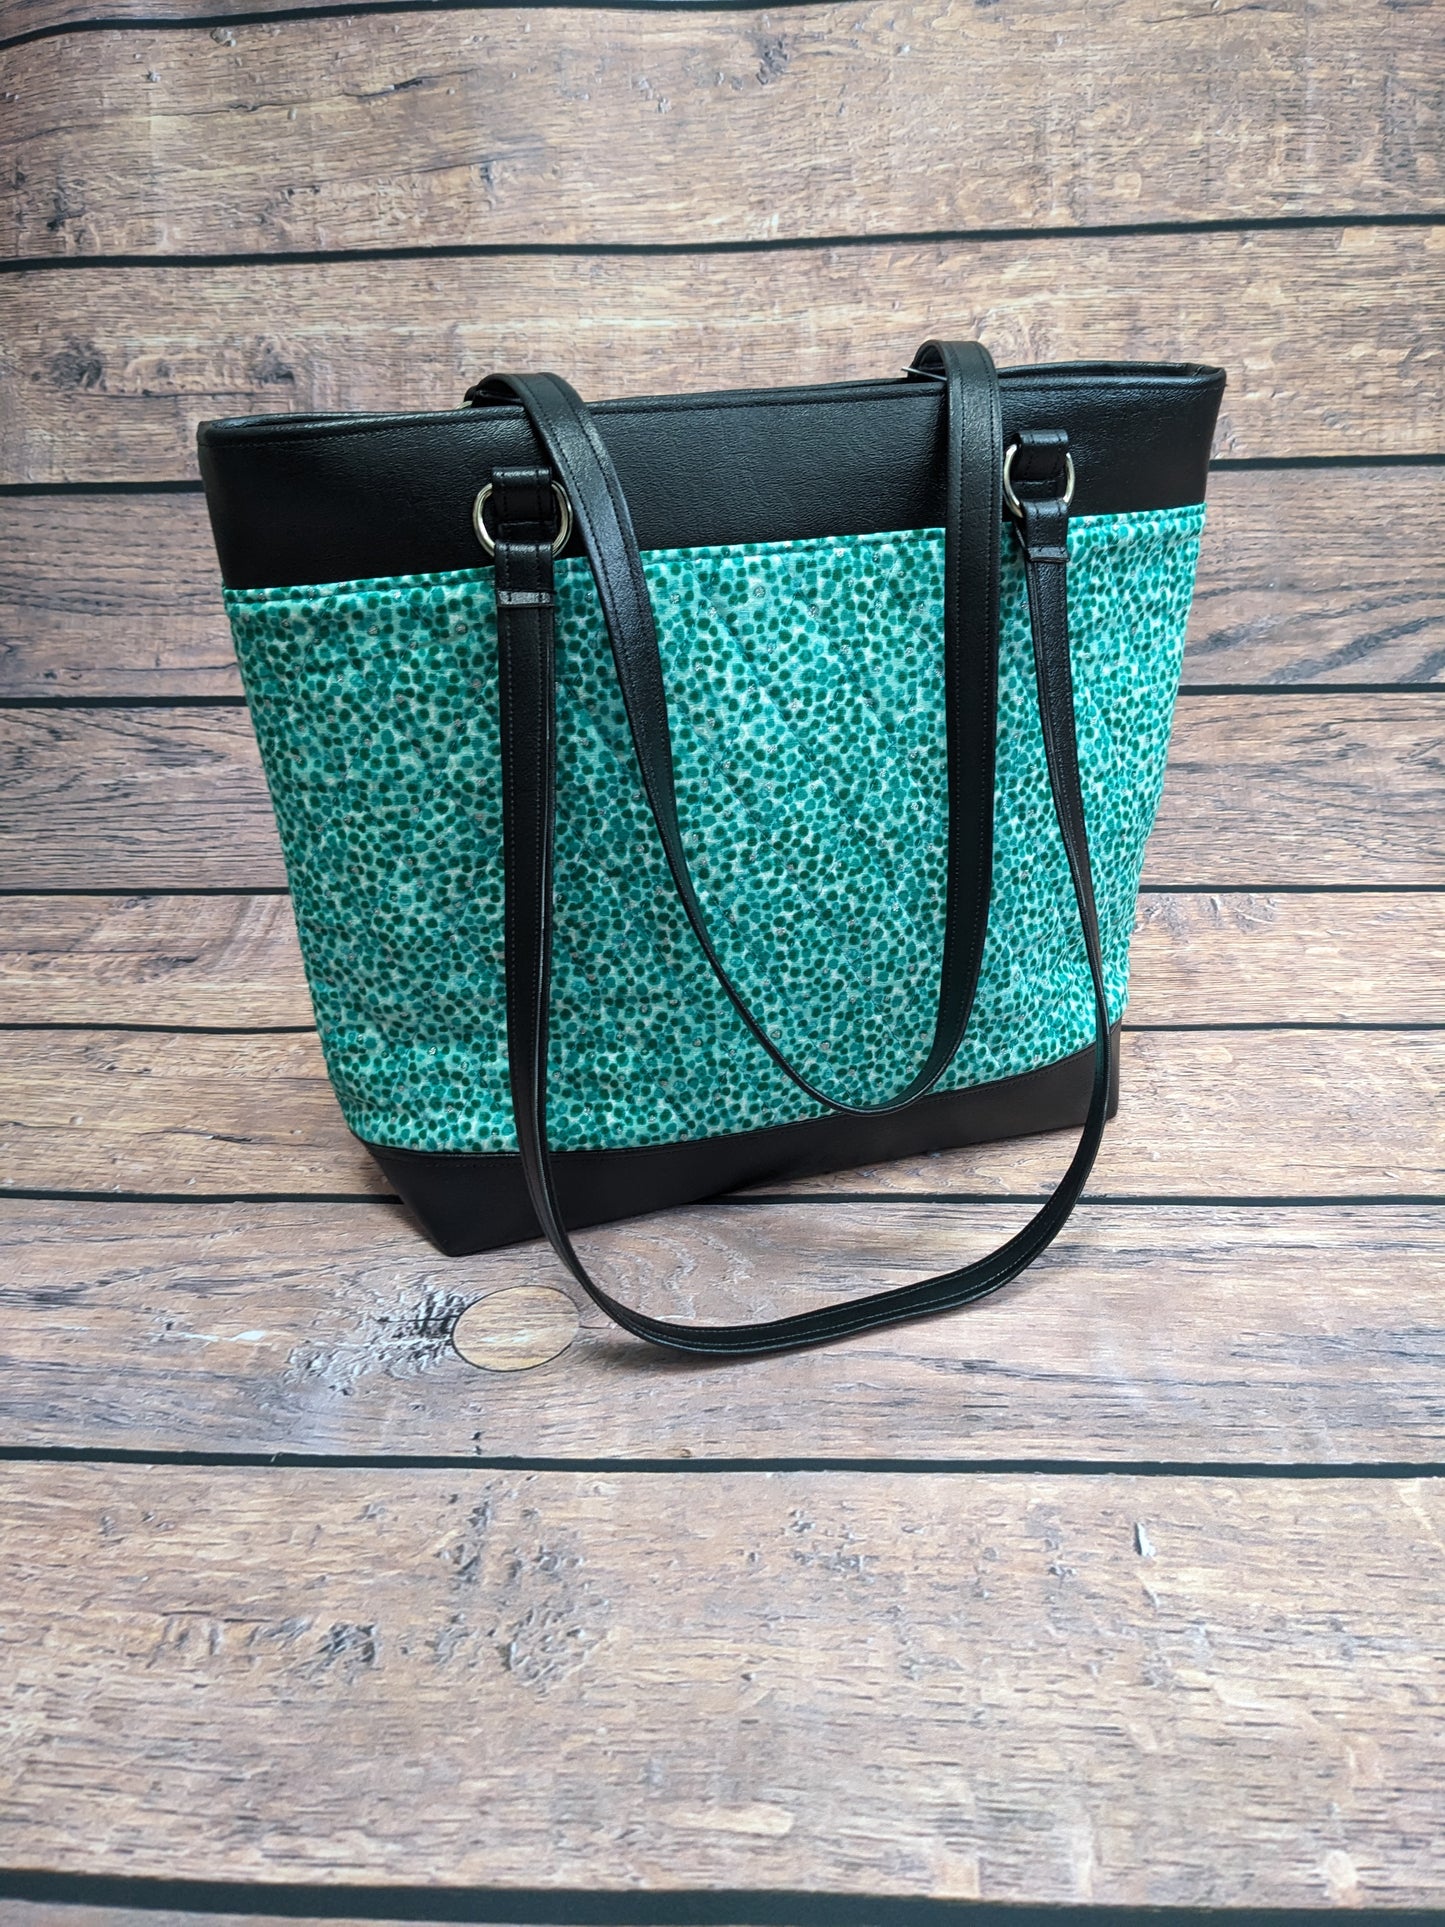 Camela Stylish Mid-Sized Handbag [Green Speckled]: Spacious Style for Every Occasion